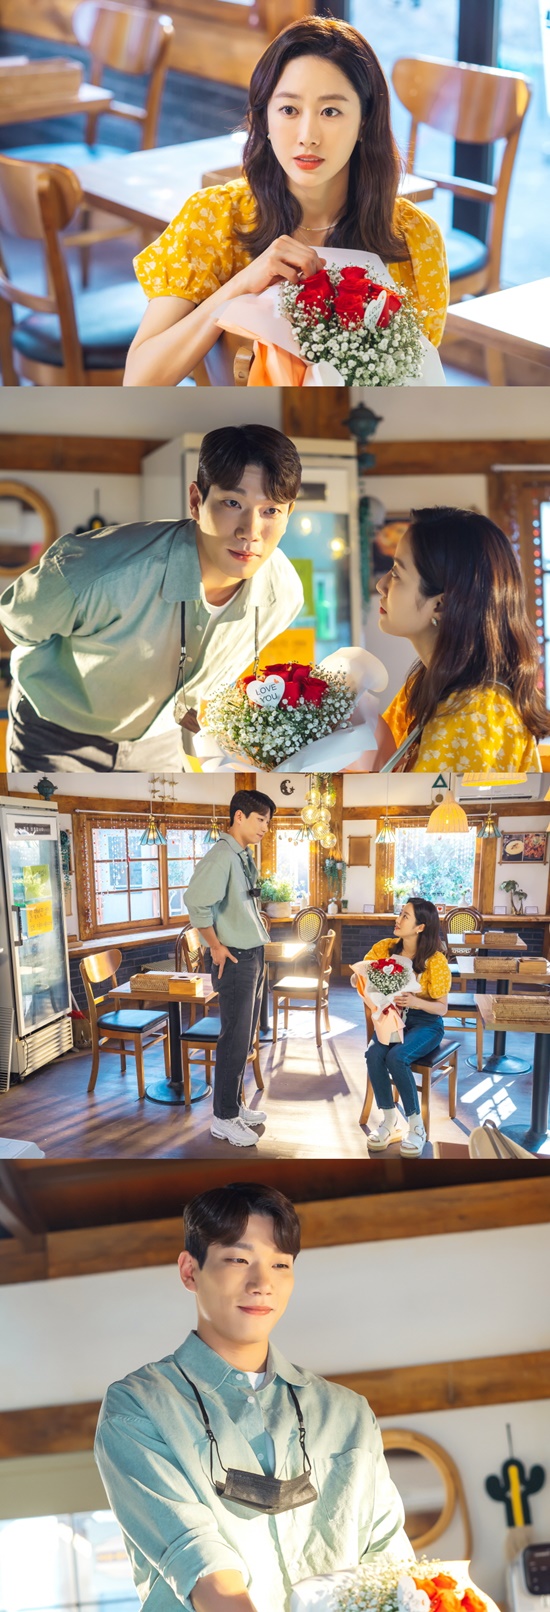 OK Photon Mae Kim Kyungnam is spotted kissing Jeon Hye-binKBS 2TV WeekendDrama OK Photon, which was broadcast on the 6th, exceeded 30% once again with 26.5% of the nationwide ratings of Nielsen Korea and 30.4% of the second part.As a result, all channels broadcast during Weekend for 10 consecutive weeks, all programs, have been ranked # 1 in the audience rating, revealing the strength of the strongest person who can not be tolerated.In the last broadcast, Lee Kwang-sik (Jeon Hye-bin) and Han Ye-seul (Kim Kyoungnam) made a warm and happy love appearance.Lee Kwang-sik announced his love affair by informing his family that Han Ye-seul paid 50 million won to Na-seung (Son Woo-hyun) for his divorce.Lee Kwang-sik made Han Ye-seul, who is preparing for a trot singer, inside and outside, and Han Ye-seul made Lee Kwang-sik book a marriage proposal by phone.On the 11th, OK Photon side released a steel that showed a Surprise event that handed Surprise Ball Popo after Han Ye-seul gave a bouquet to Lee Kwang-sik.In the photo, Han Ye-seul hides the bouquet behind his back and tells Lee Kwang-sik, who was sitting in the restaurant.In the bouquet with red roses in the mist, Lee Kwang-sik reveals a smile and Han Ye-seul puts his face with a charming saying Give me a prize if it is beautiful.Then, Han Ye-seul, who does not know that Lee Kwang-sik is taking a sneak away from his body, is surprised to go to Lee Kwang-sik at the speed of light.As Lee Kwang-sik, who has a bouquet with a blank expression, is drawn, I wonder why Lee Kwang-sik avoided Han Ye-seul.Meanwhile, Jeon Hye-bin and Kim Kyoungnams Surprise sudden ball-popping scene was filmed last May.During the rehearsal, the two people tried various things about the movement and pose, and they were worried about the natural scene and raised their interest in broadcasting.Especially, Kim Kyoungnam, who has to bow down after standing and bouquet, and Jeon Hye-bin, who avoids Kim Kyoungnam after receiving it, should be vividly contained.Also, as soon as the OK cut fell, the two people laughed at the laughter they had endured for the filming, and they filled the scene with vitamin energy.Jeon Hye-bin and Kim Kyoungnam are the masters of detail, expressing with careful smoke without missing the density of the emotional line that happens in a very short moment, said the production team of OK Photon, Lee Kwang-sik and Han Ye-seul, who are re-anxious,OK Photon Mae will be broadcast at 7:55 pm on the 12th.Photo: KBS 2TV OK Photon Mae